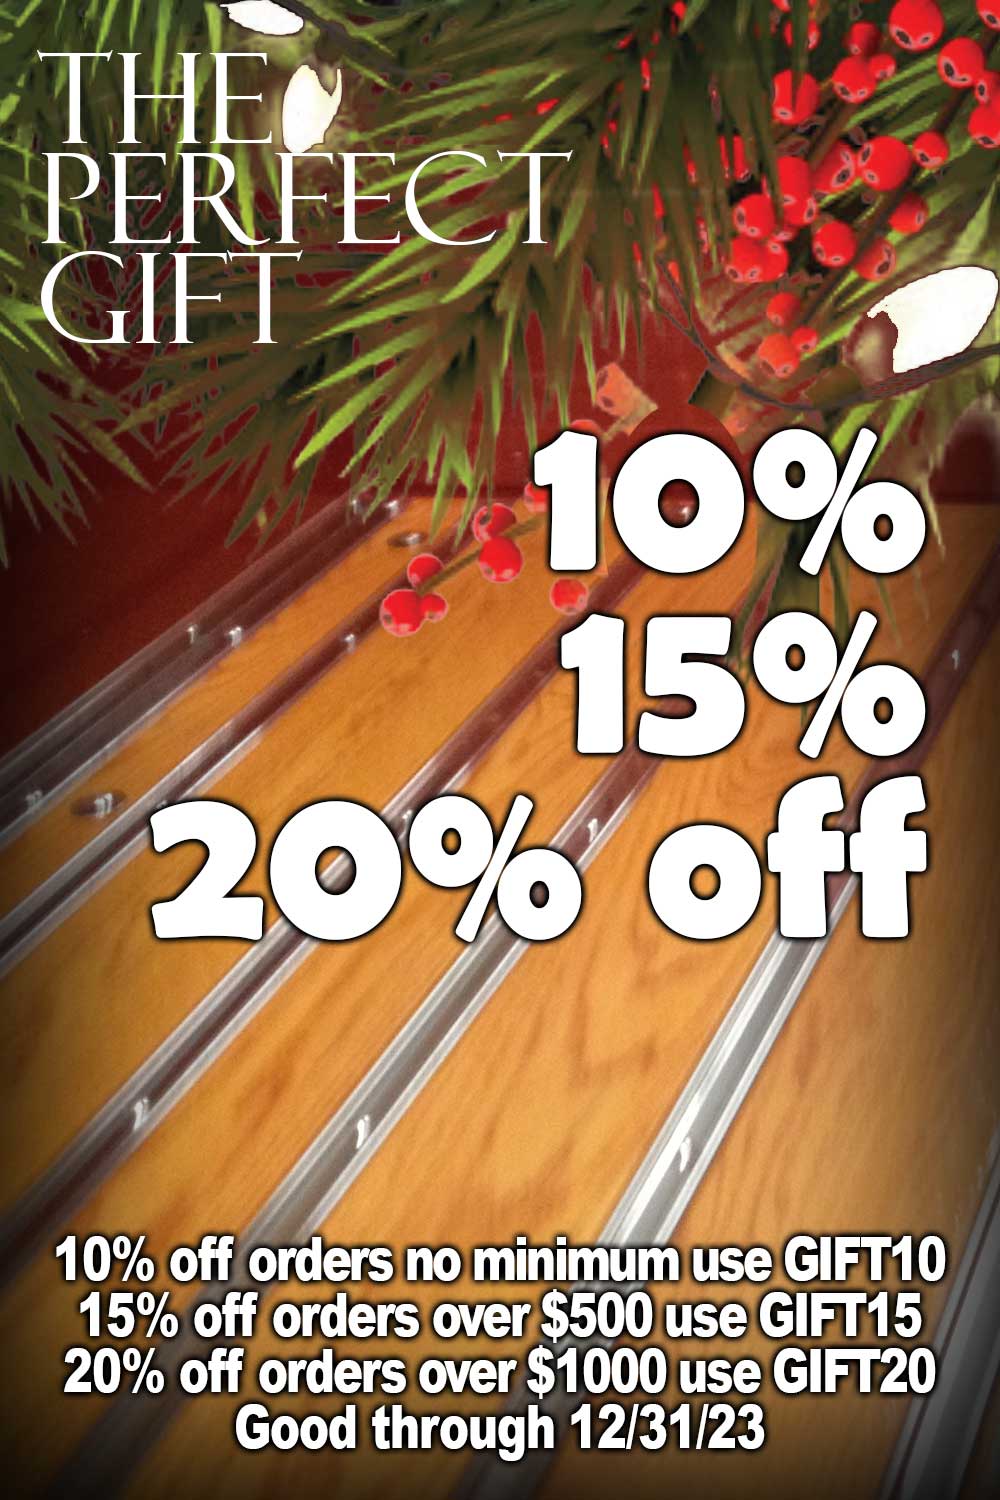 Up to 20% off! Good until 12/31/23